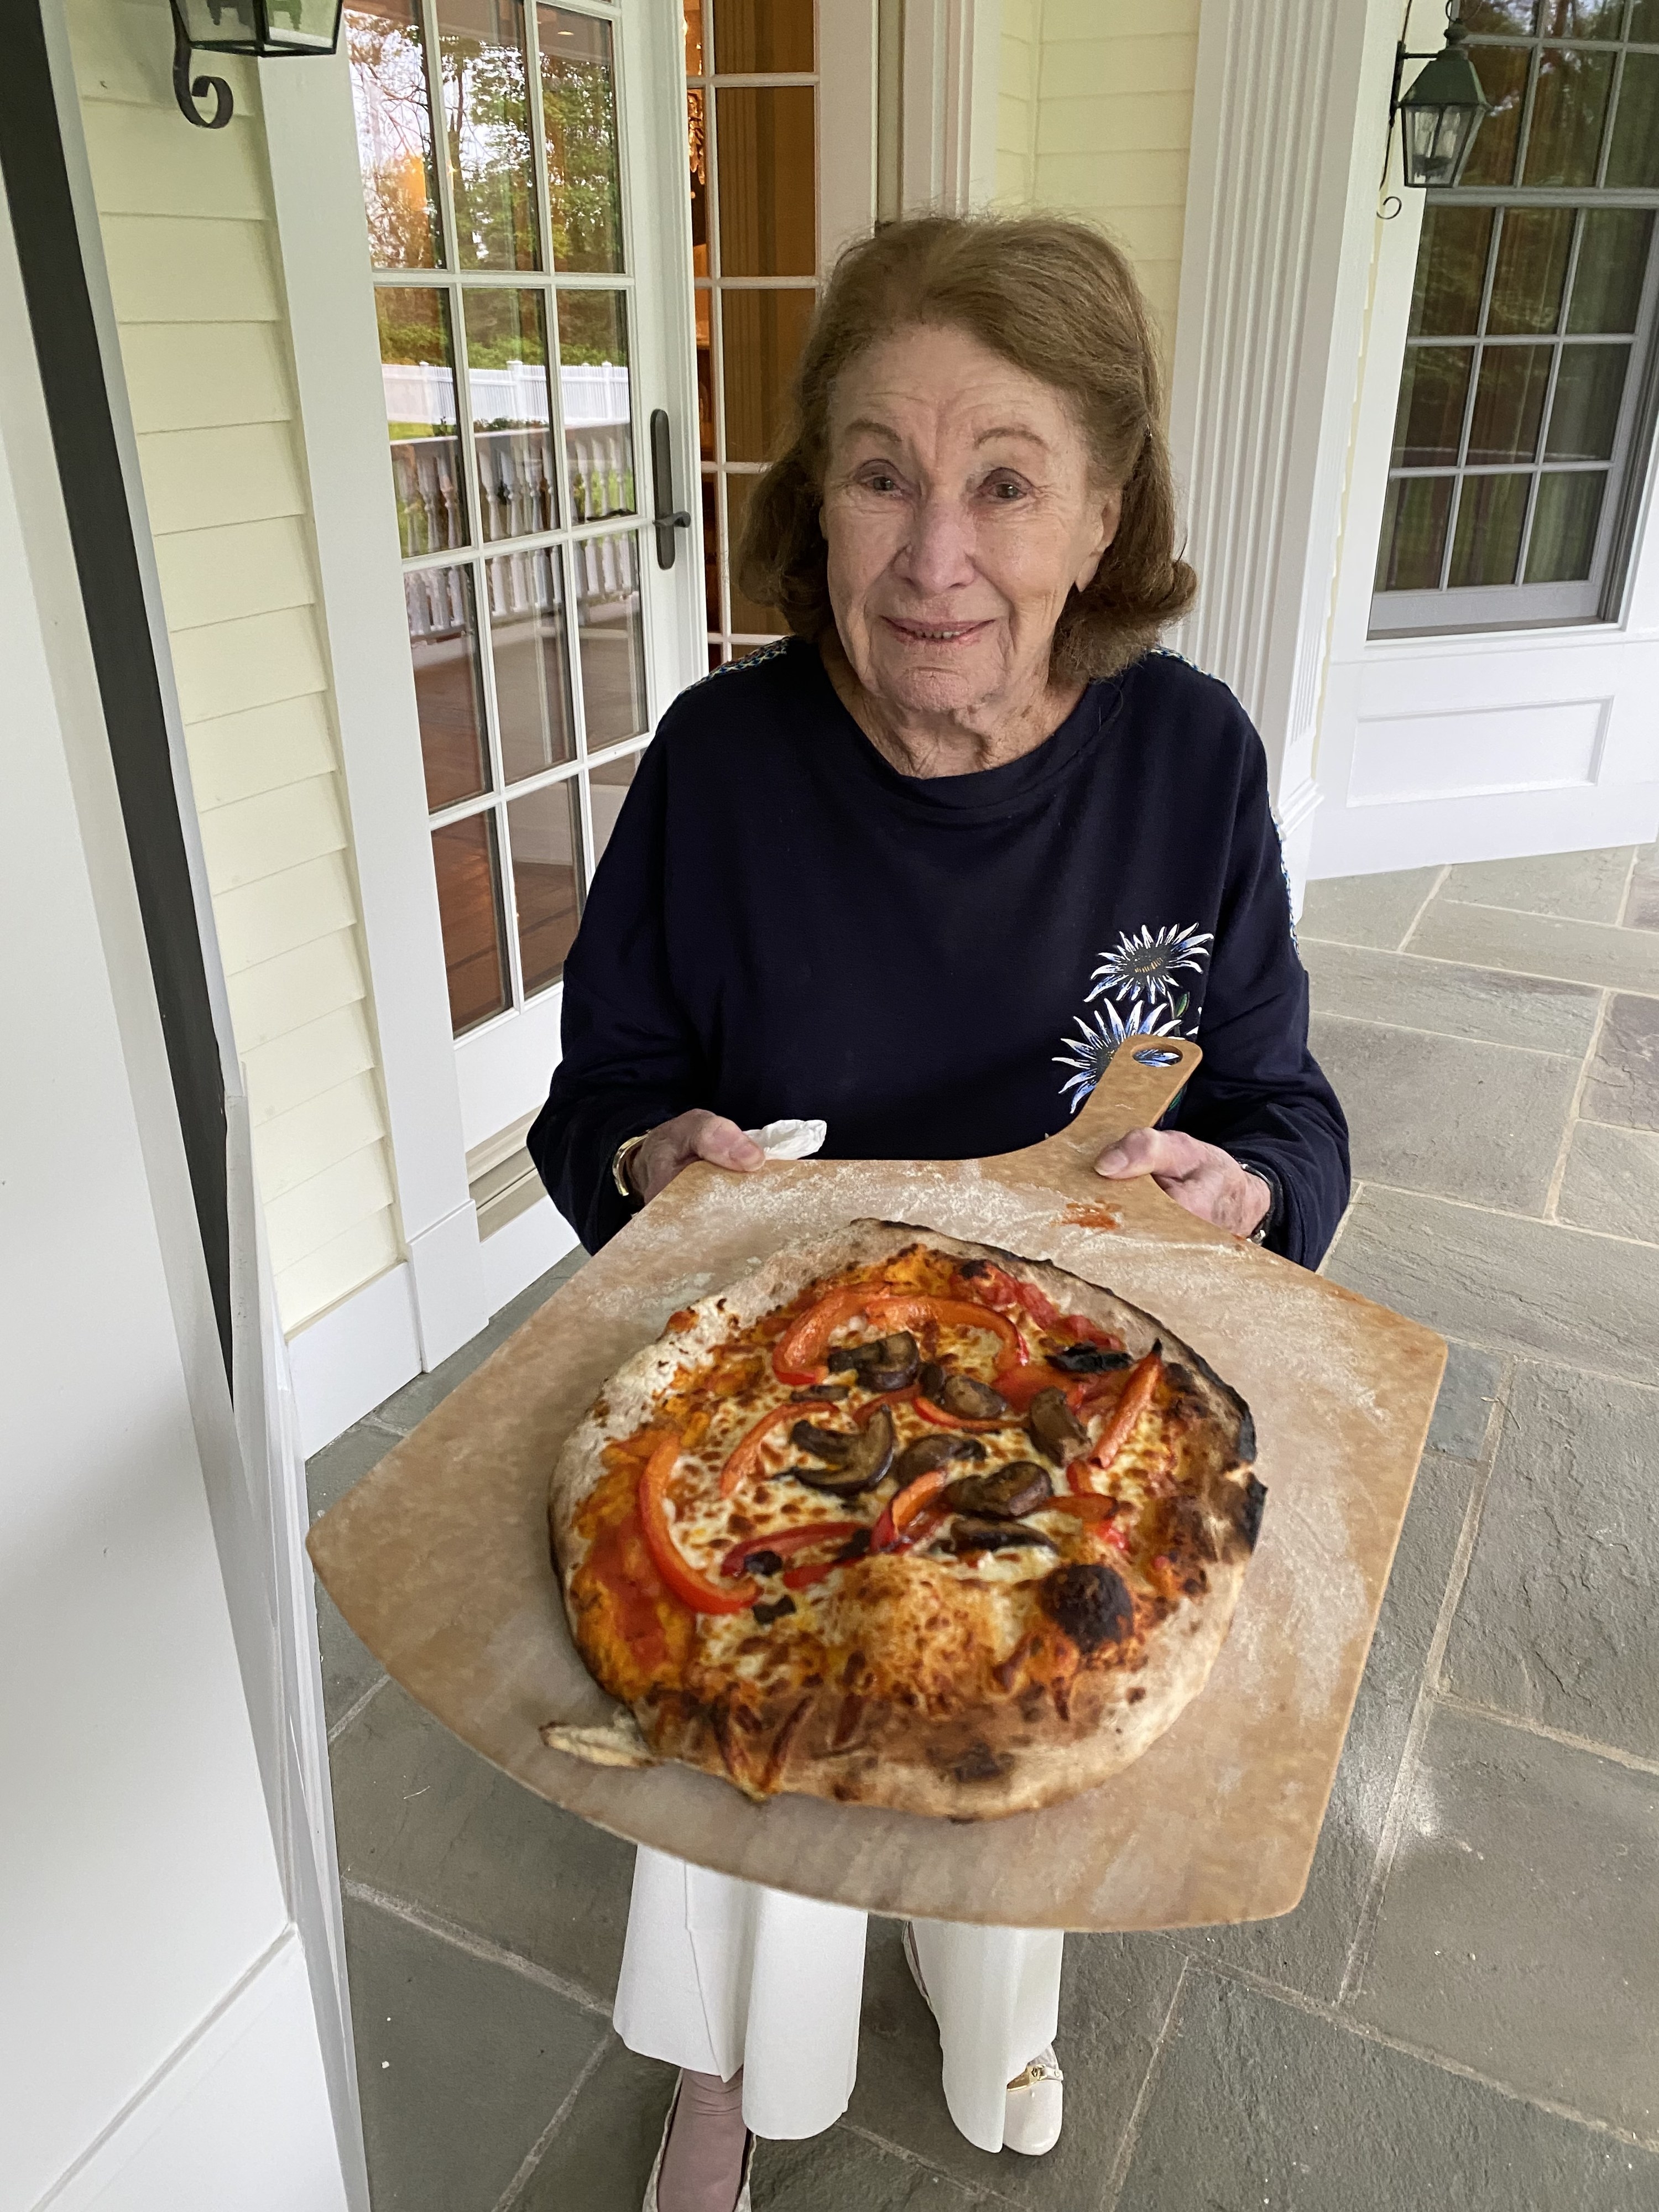 Grandma holding her cooked pizza on a peel and smiling